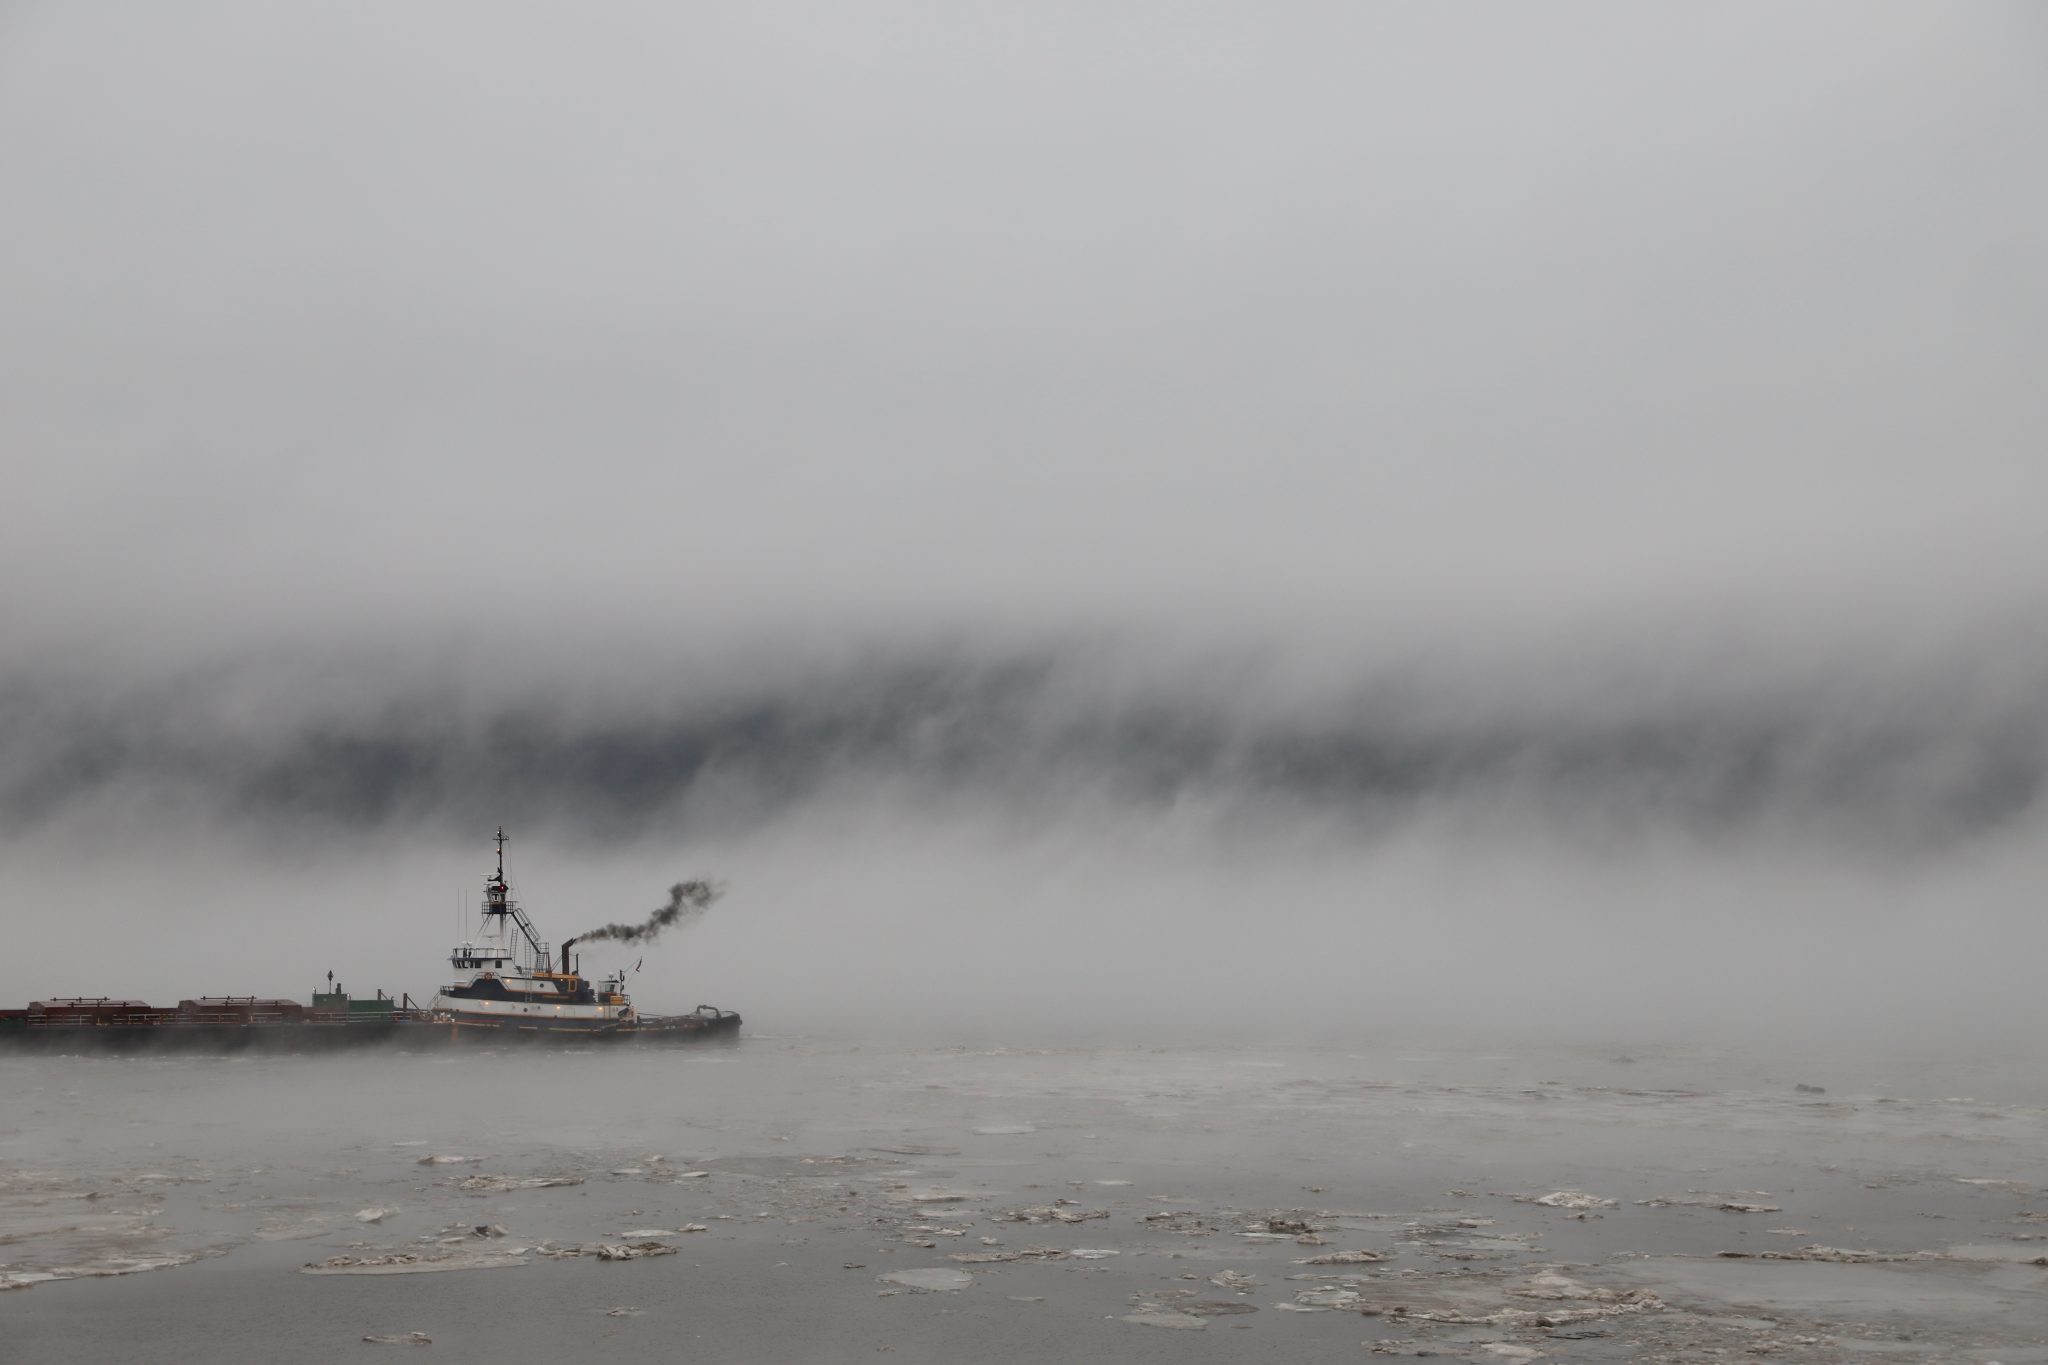 Tugboat on the icy Hudson River